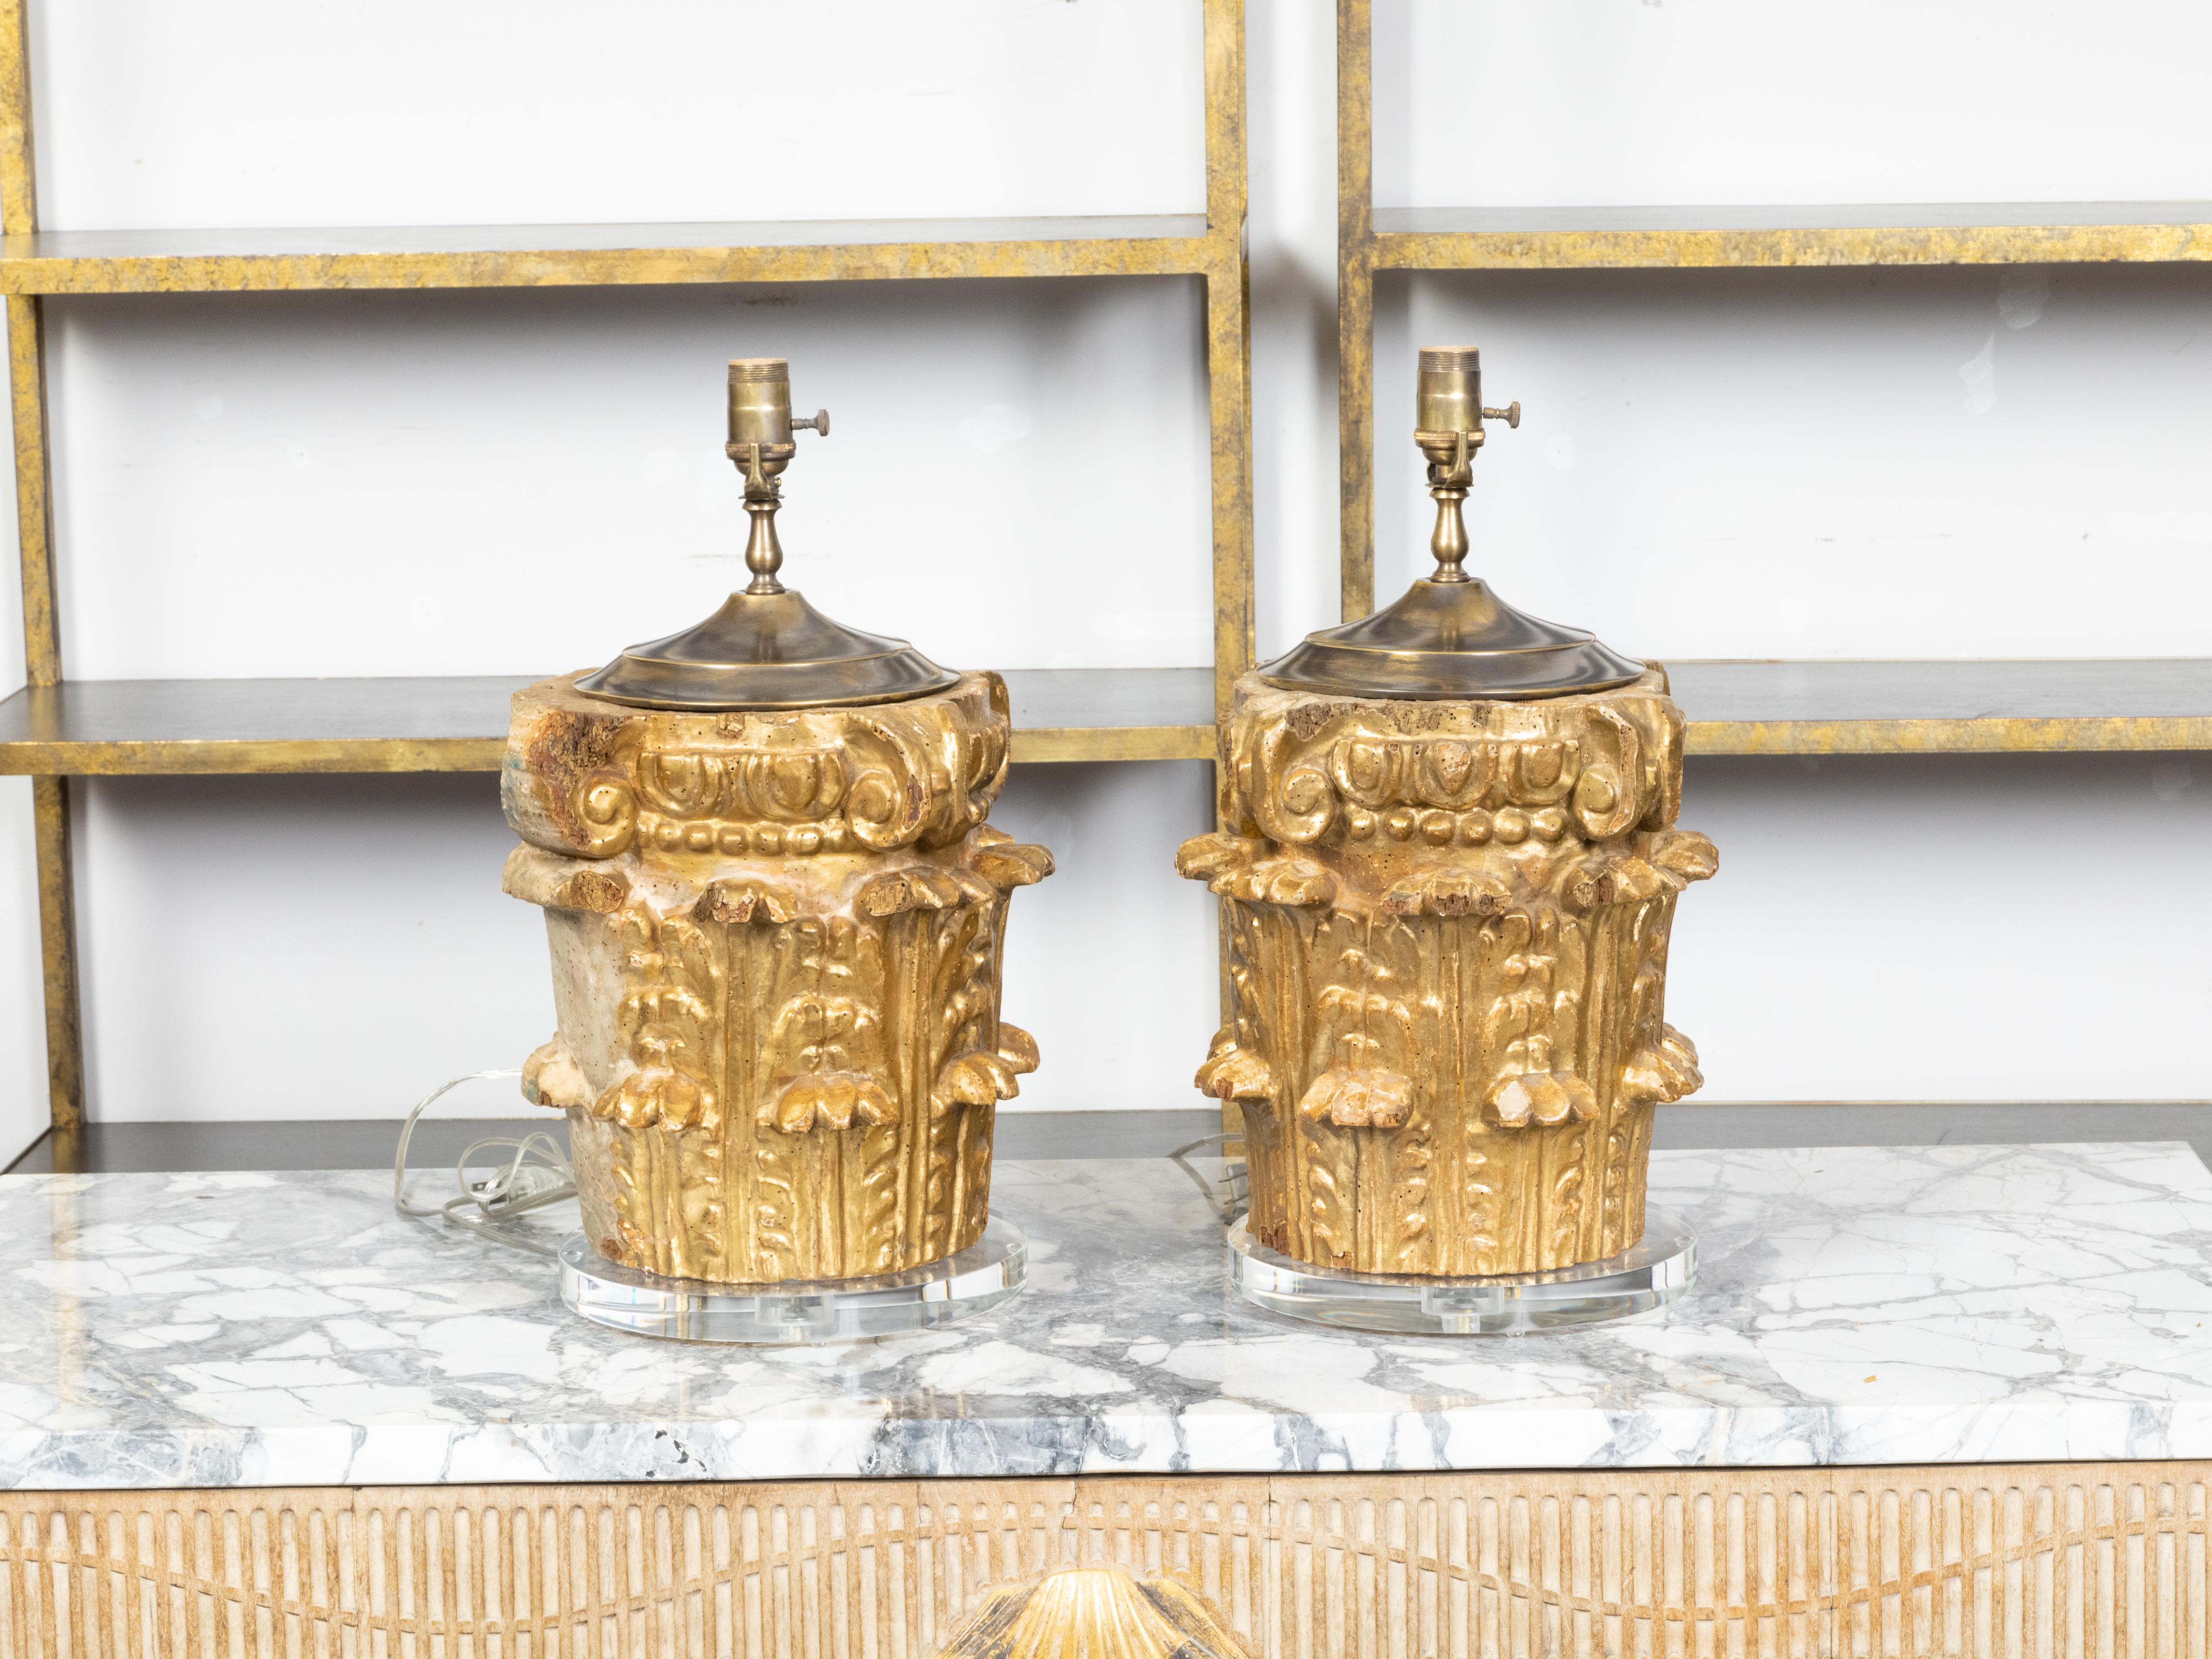 Lucite Italian 19th Century Carved Giltwood Composite Capitals Made into Table Lamps For Sale